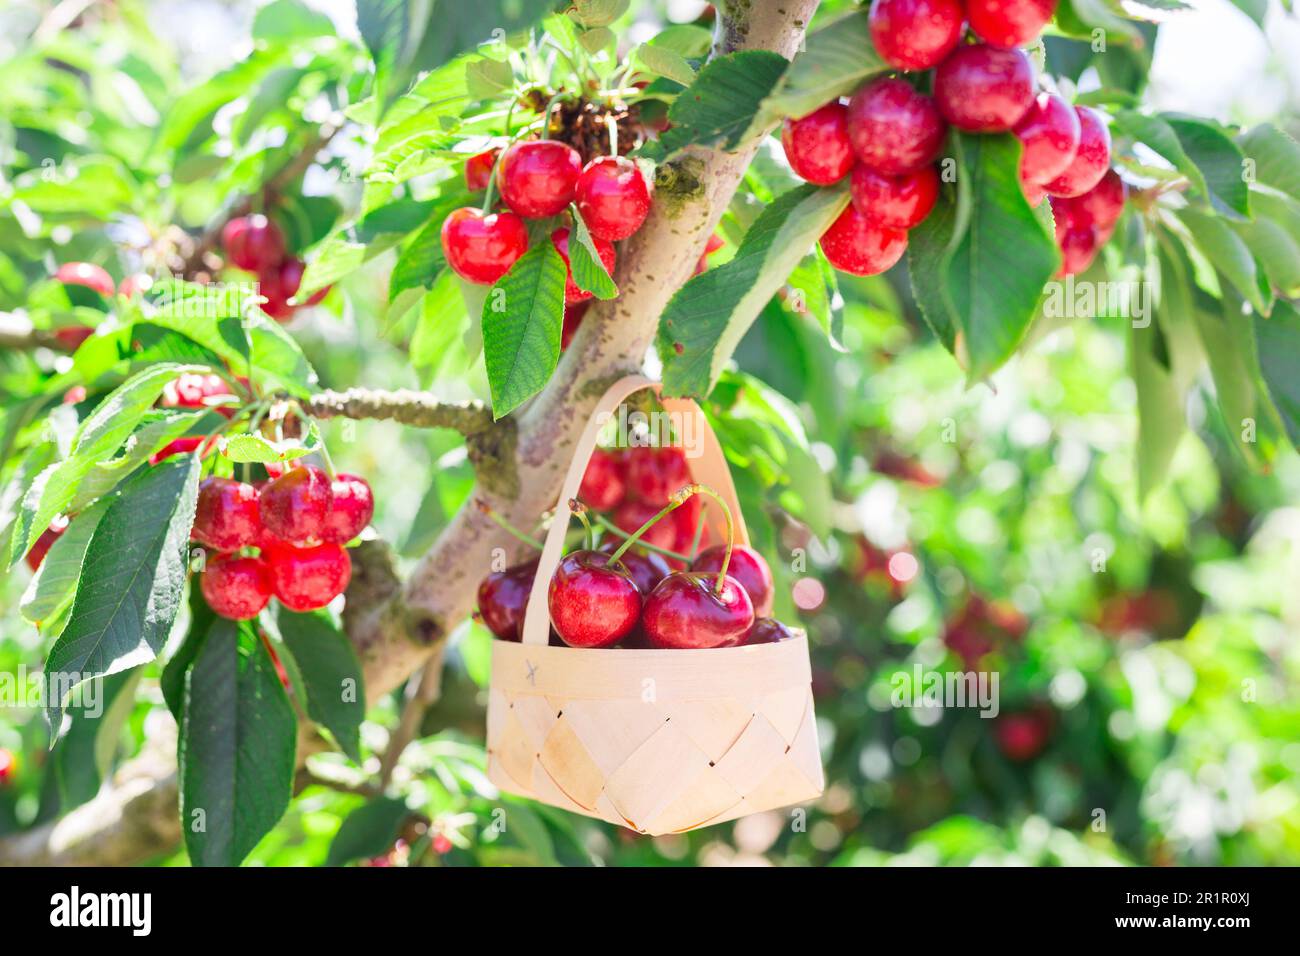 wicker basket filled with ripe cherries against background of cherry trees with cherries berries Stock Photo